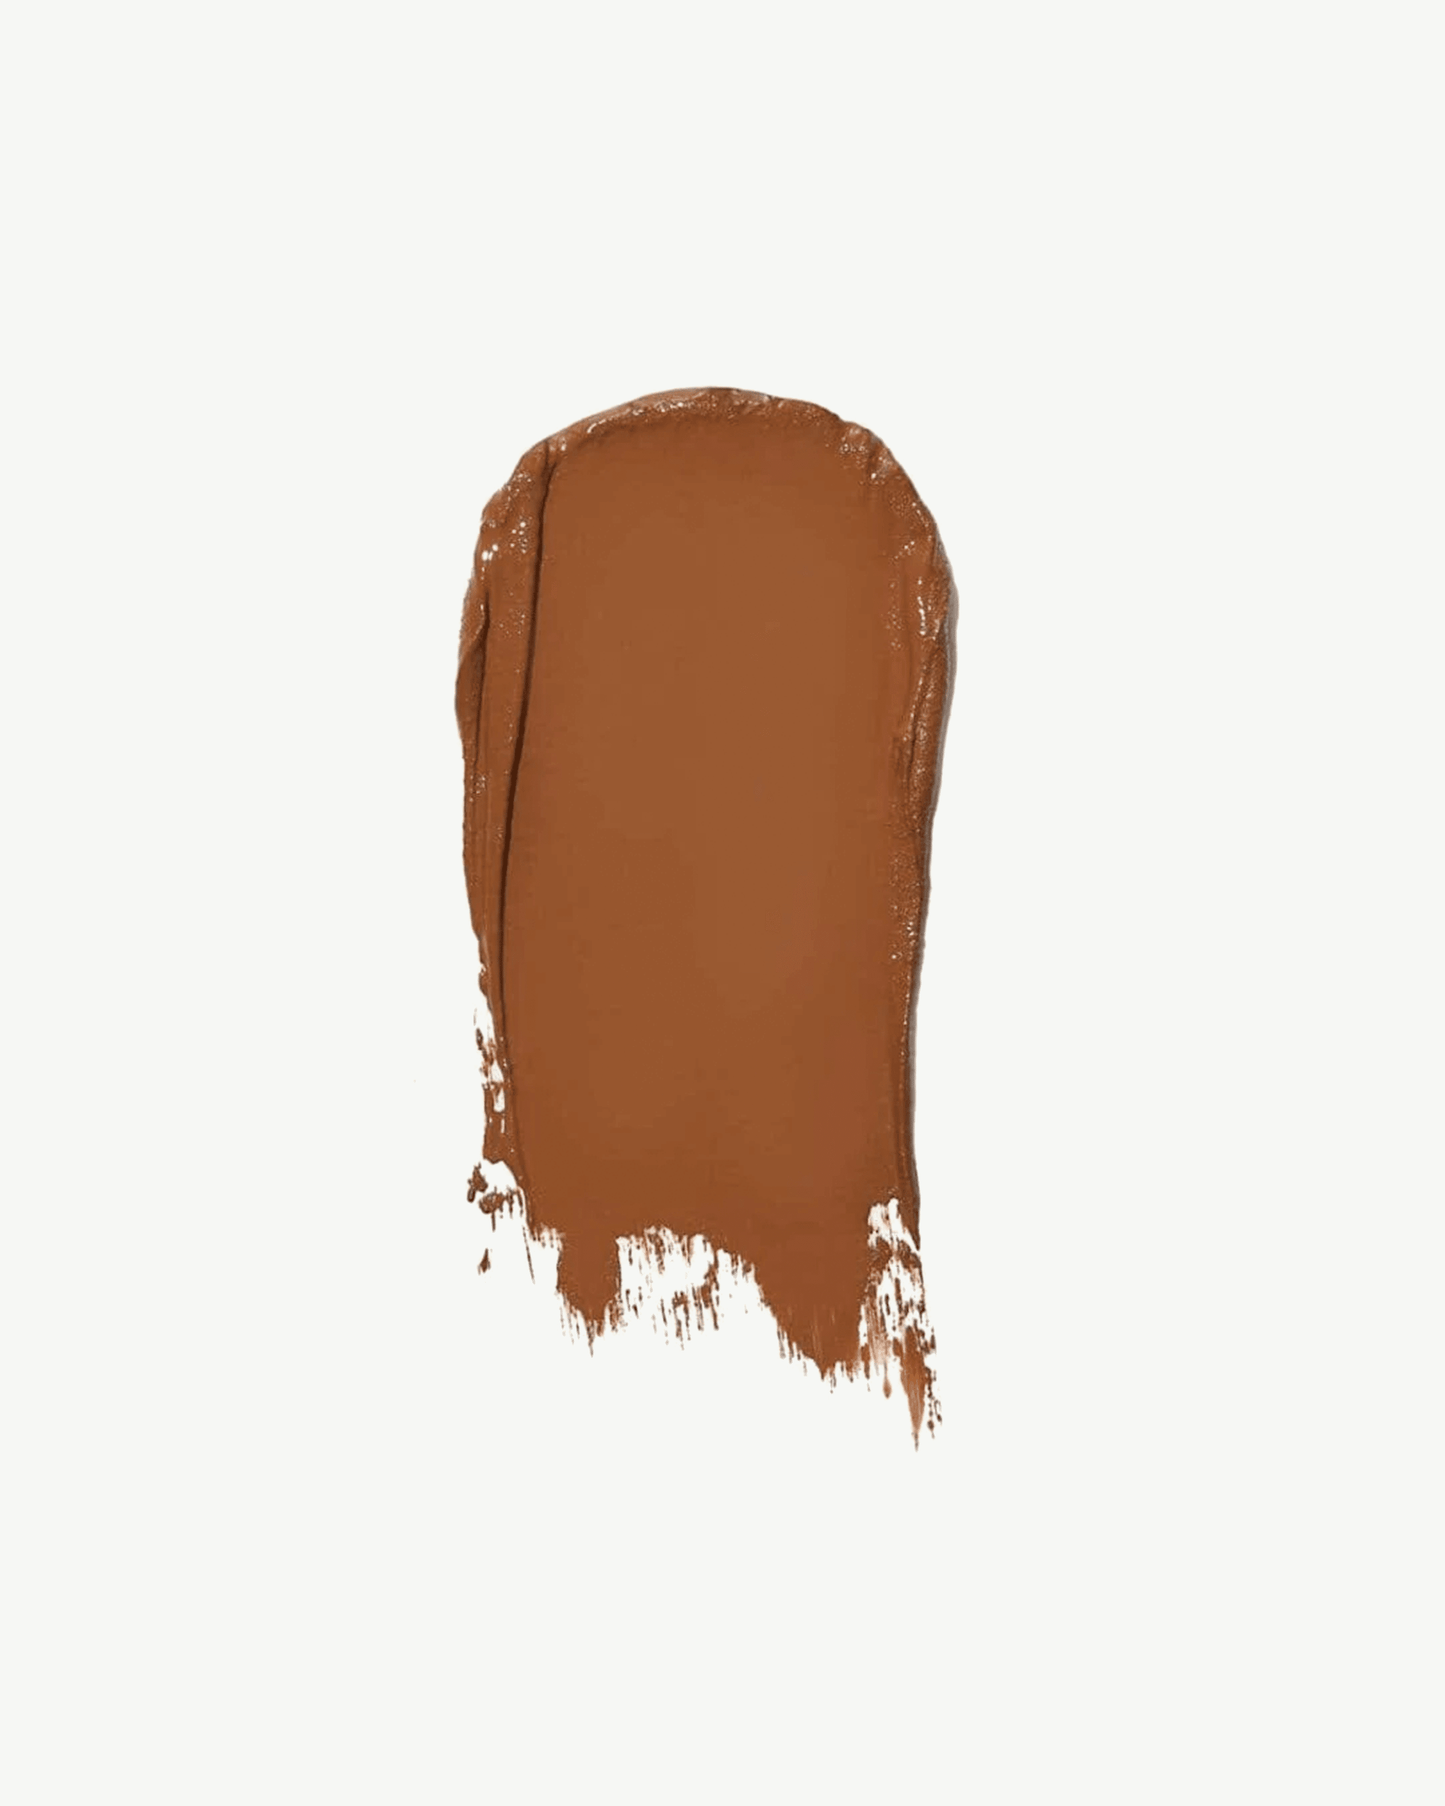  Shade 88 (for deep skin with warm undertones)